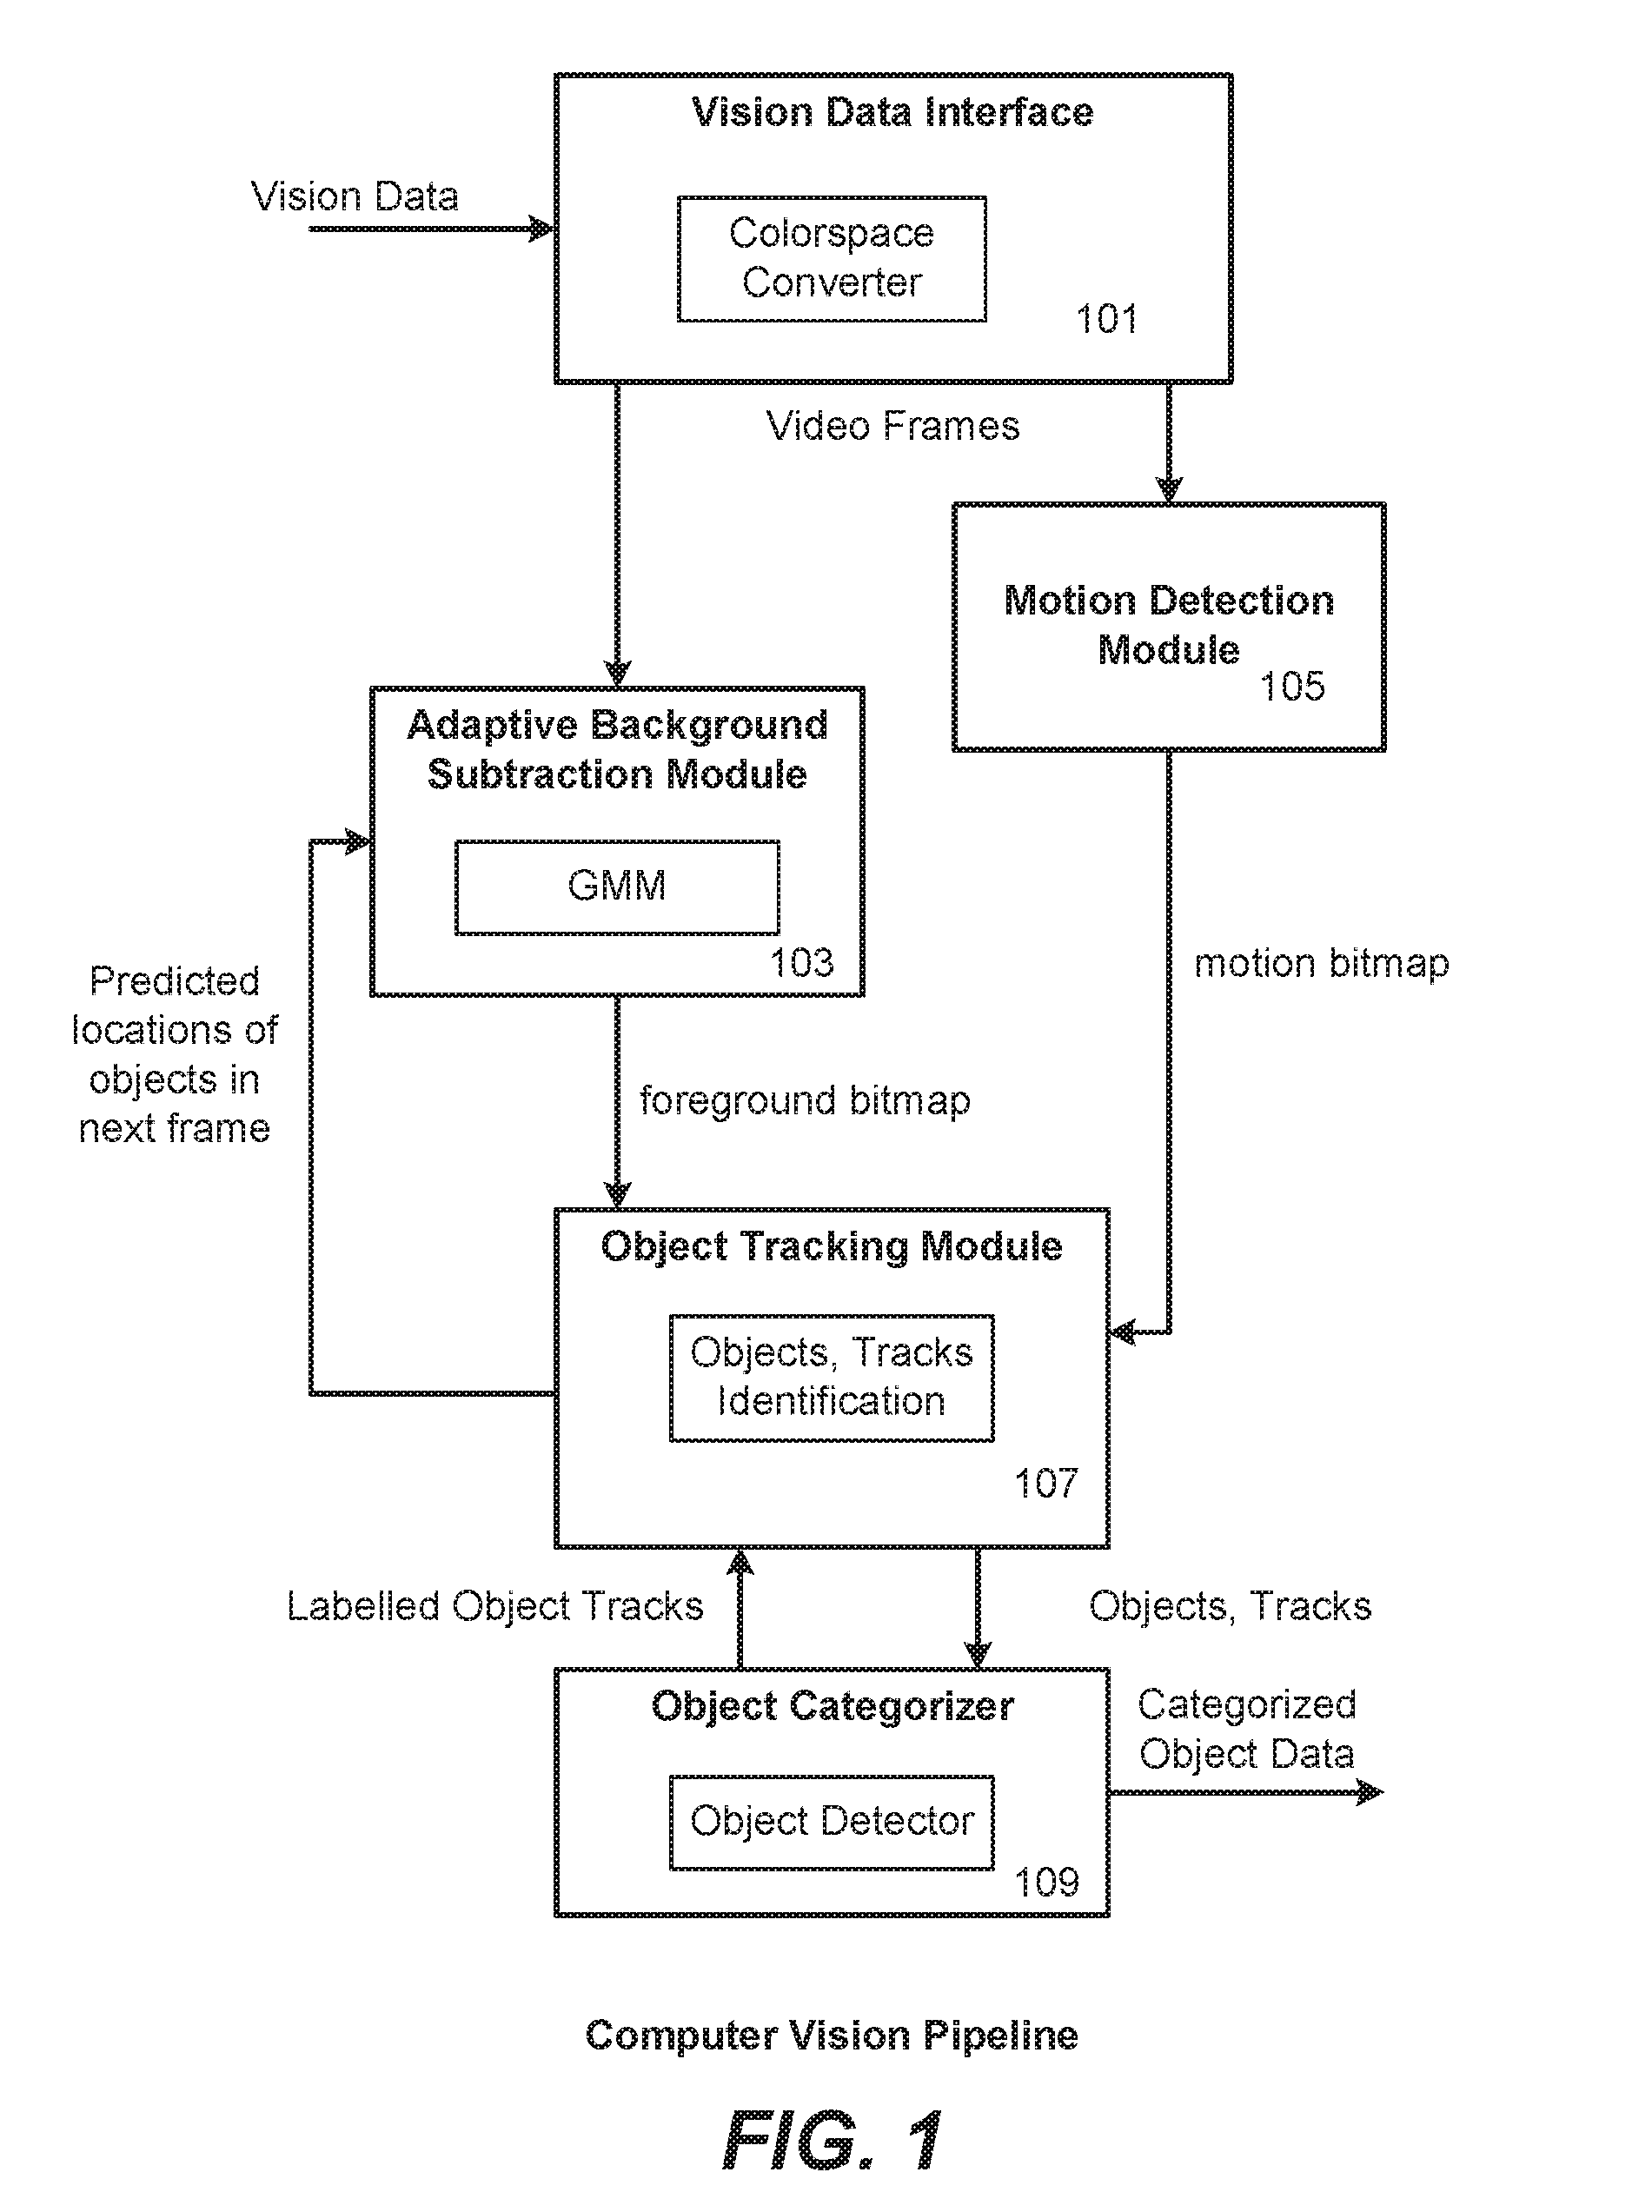 Computer Vision Pipeline and Methods for Detection of Specified Moving Objects